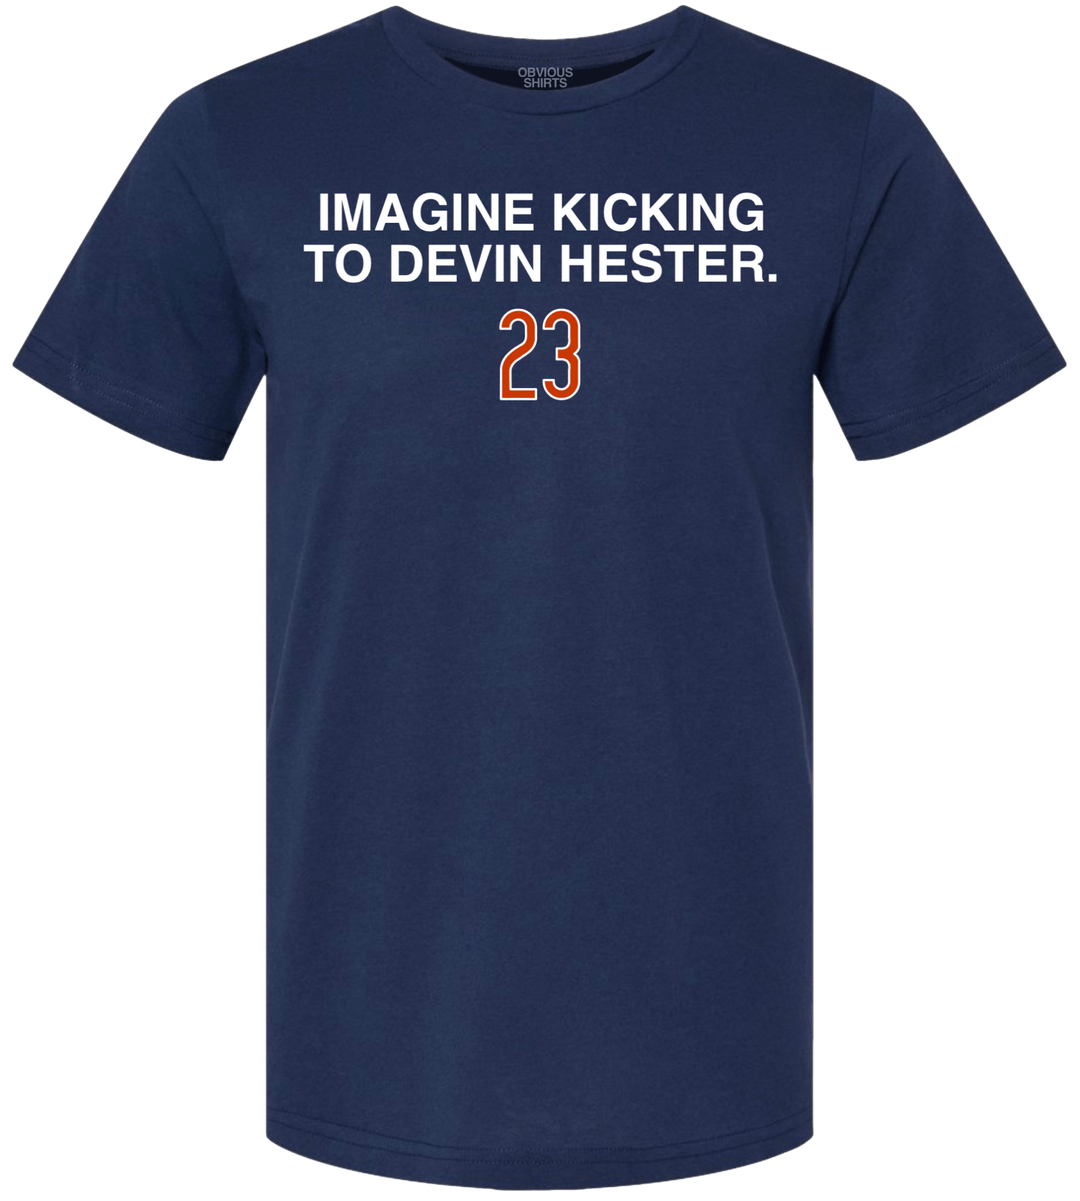 IMAGINE KICKING TO DEVIN HESTER. - OBVIOUS SHIRTS